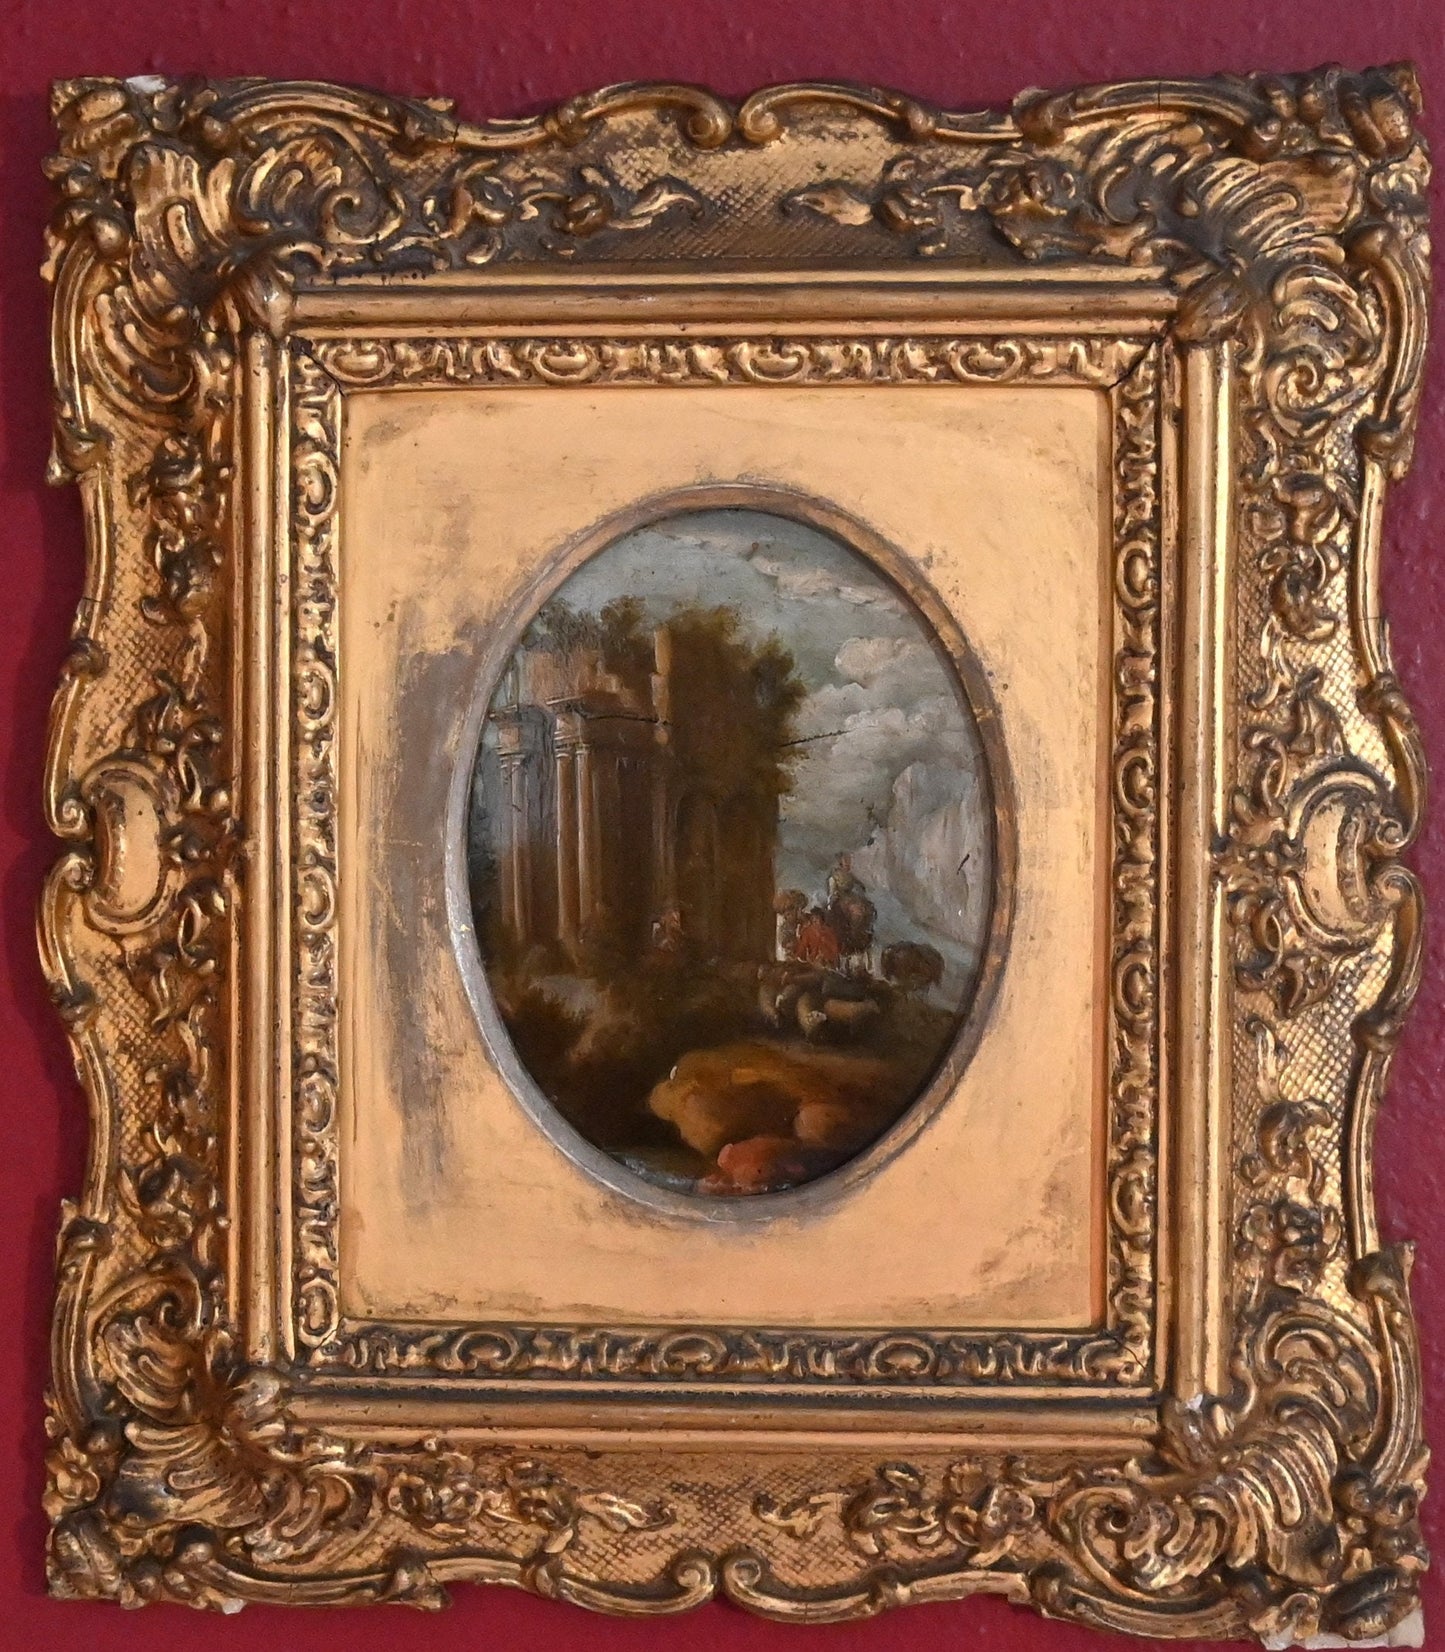 1700's Classical Ruin Master Painting on Copper circle of Charles Louis Clerisseau (French 1721-1820) 27 cm by 23.5 cm) period frame